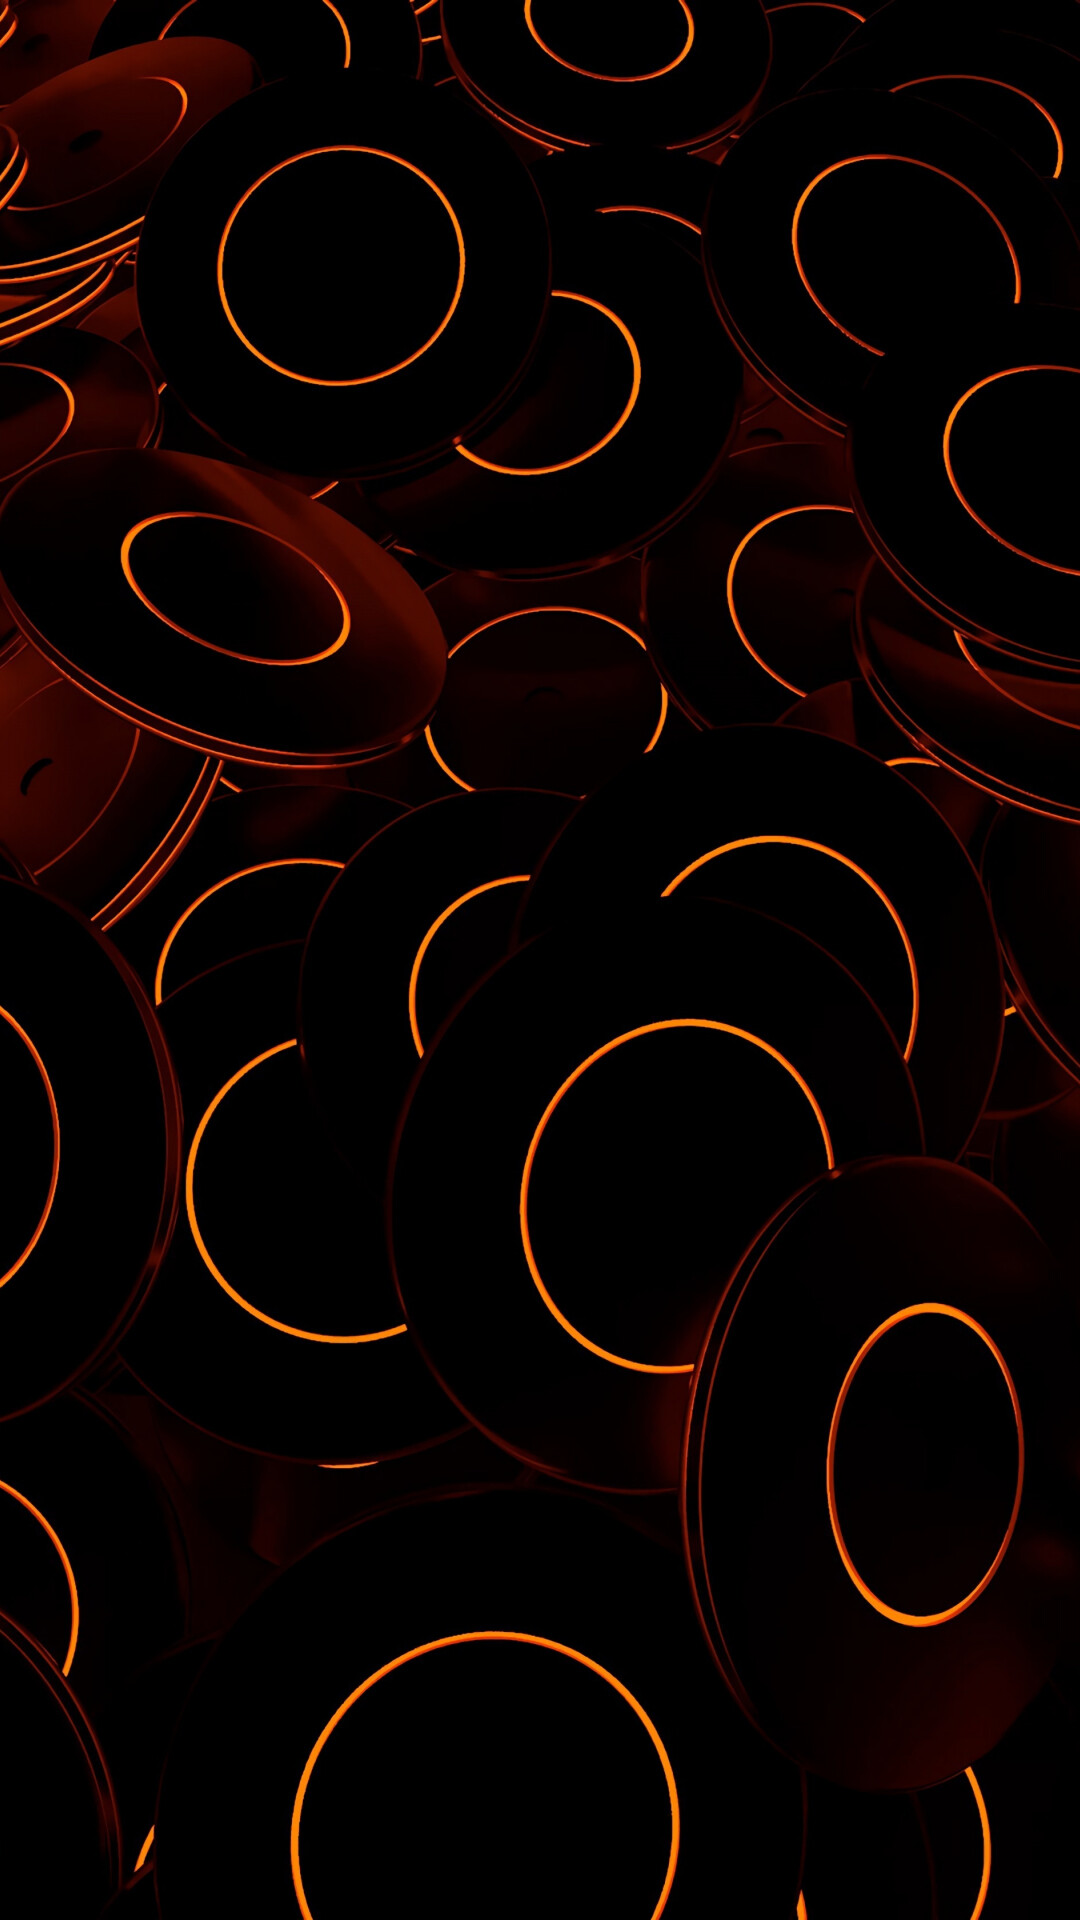 Glow in the Dark: Glowing disks, Neon lines, Abstract, Symmetry, Pattern. 1080x1920 Full HD Background.